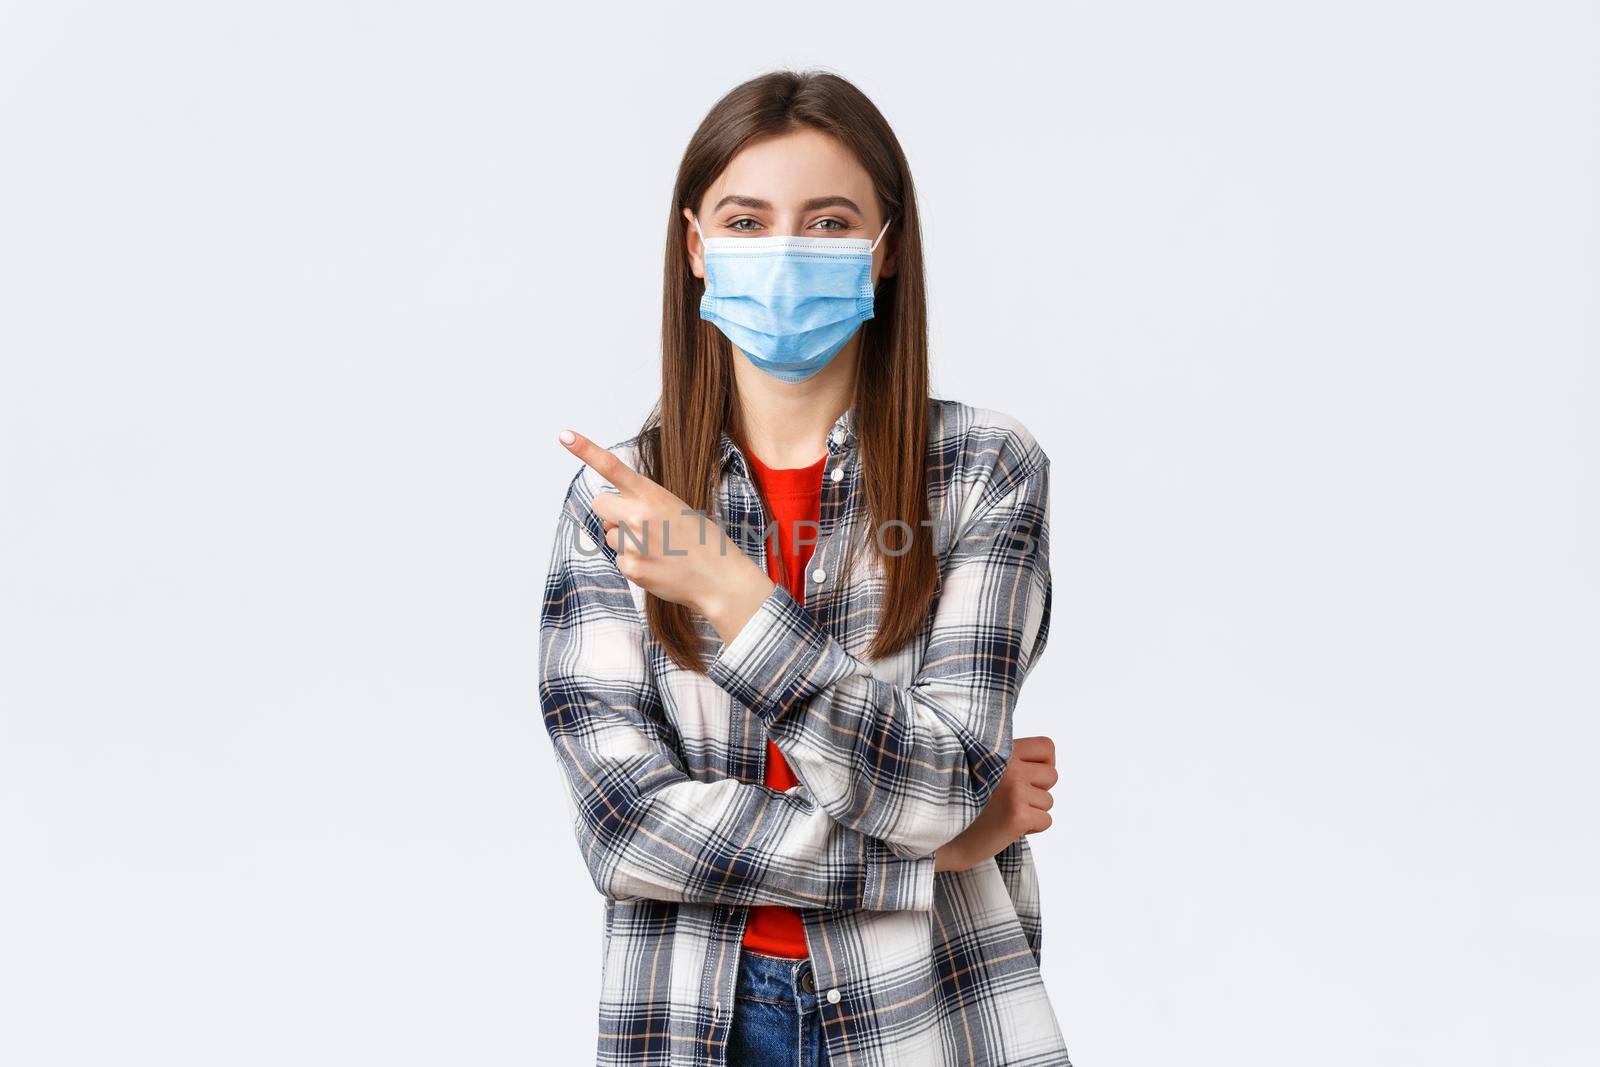 Coronavirus outbreak, leisure on quarantine, social distancing and emotions concept. Cheerful smiling caucasian woman in medical mask, pointing finger upper left corner, recommend link or product.